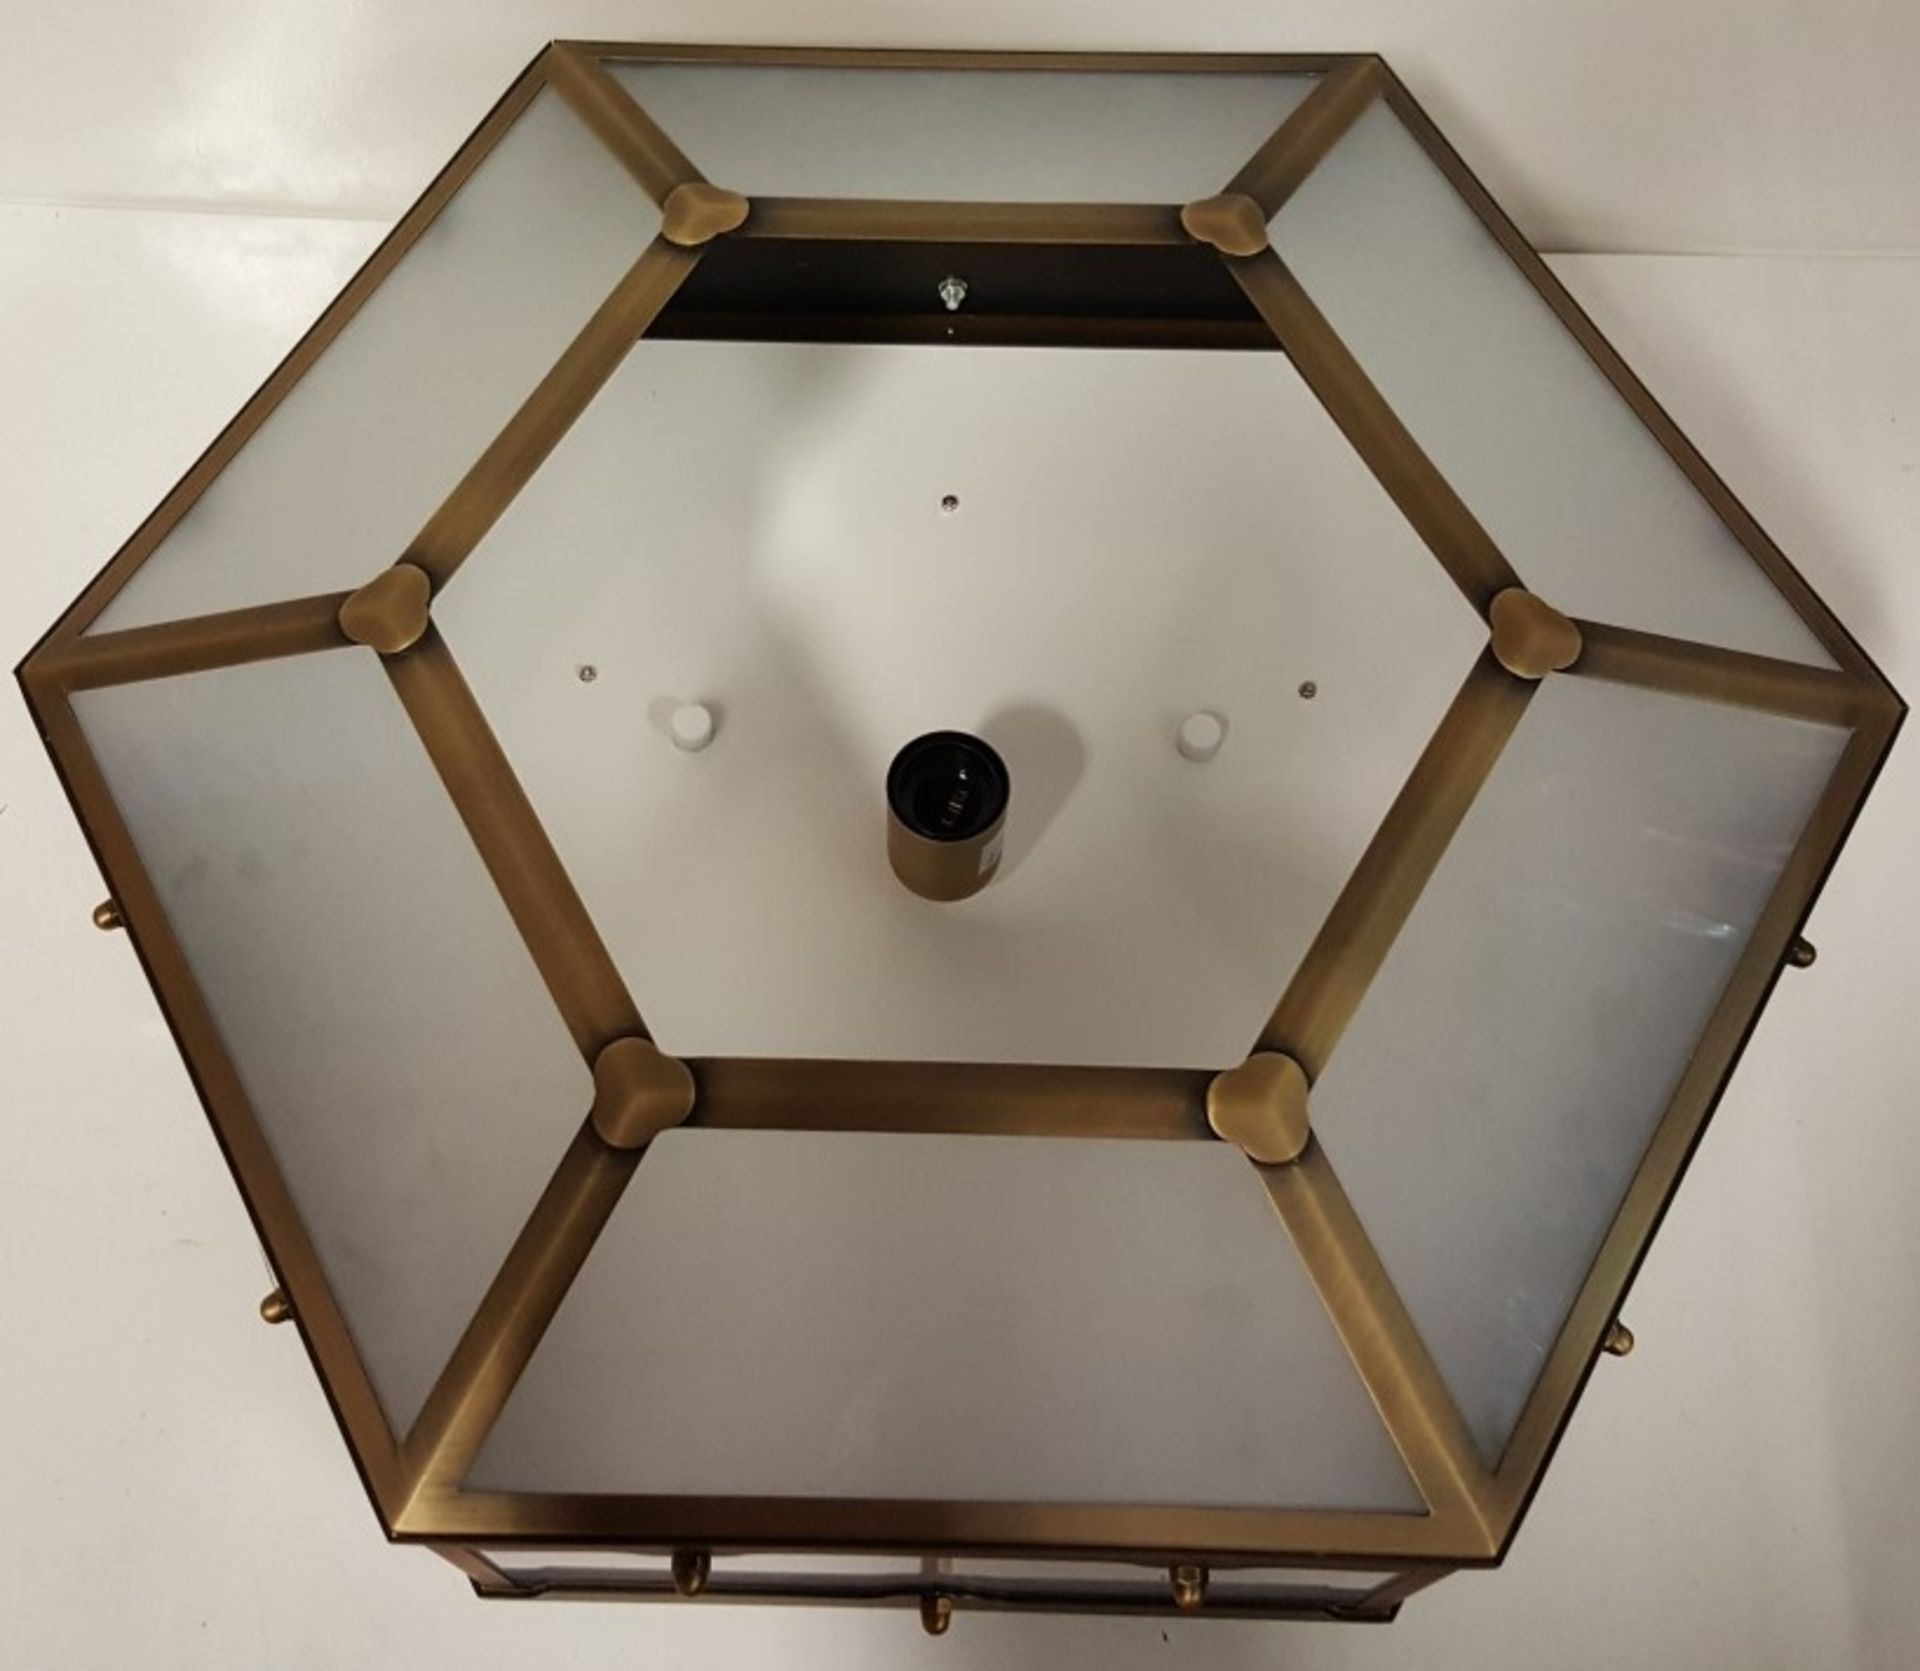 1 x Chelsom Flush Fitting Hexagonal Shaped Light Fitting In A Antique Brass Finish - REF:J2354 - Image 2 of 8